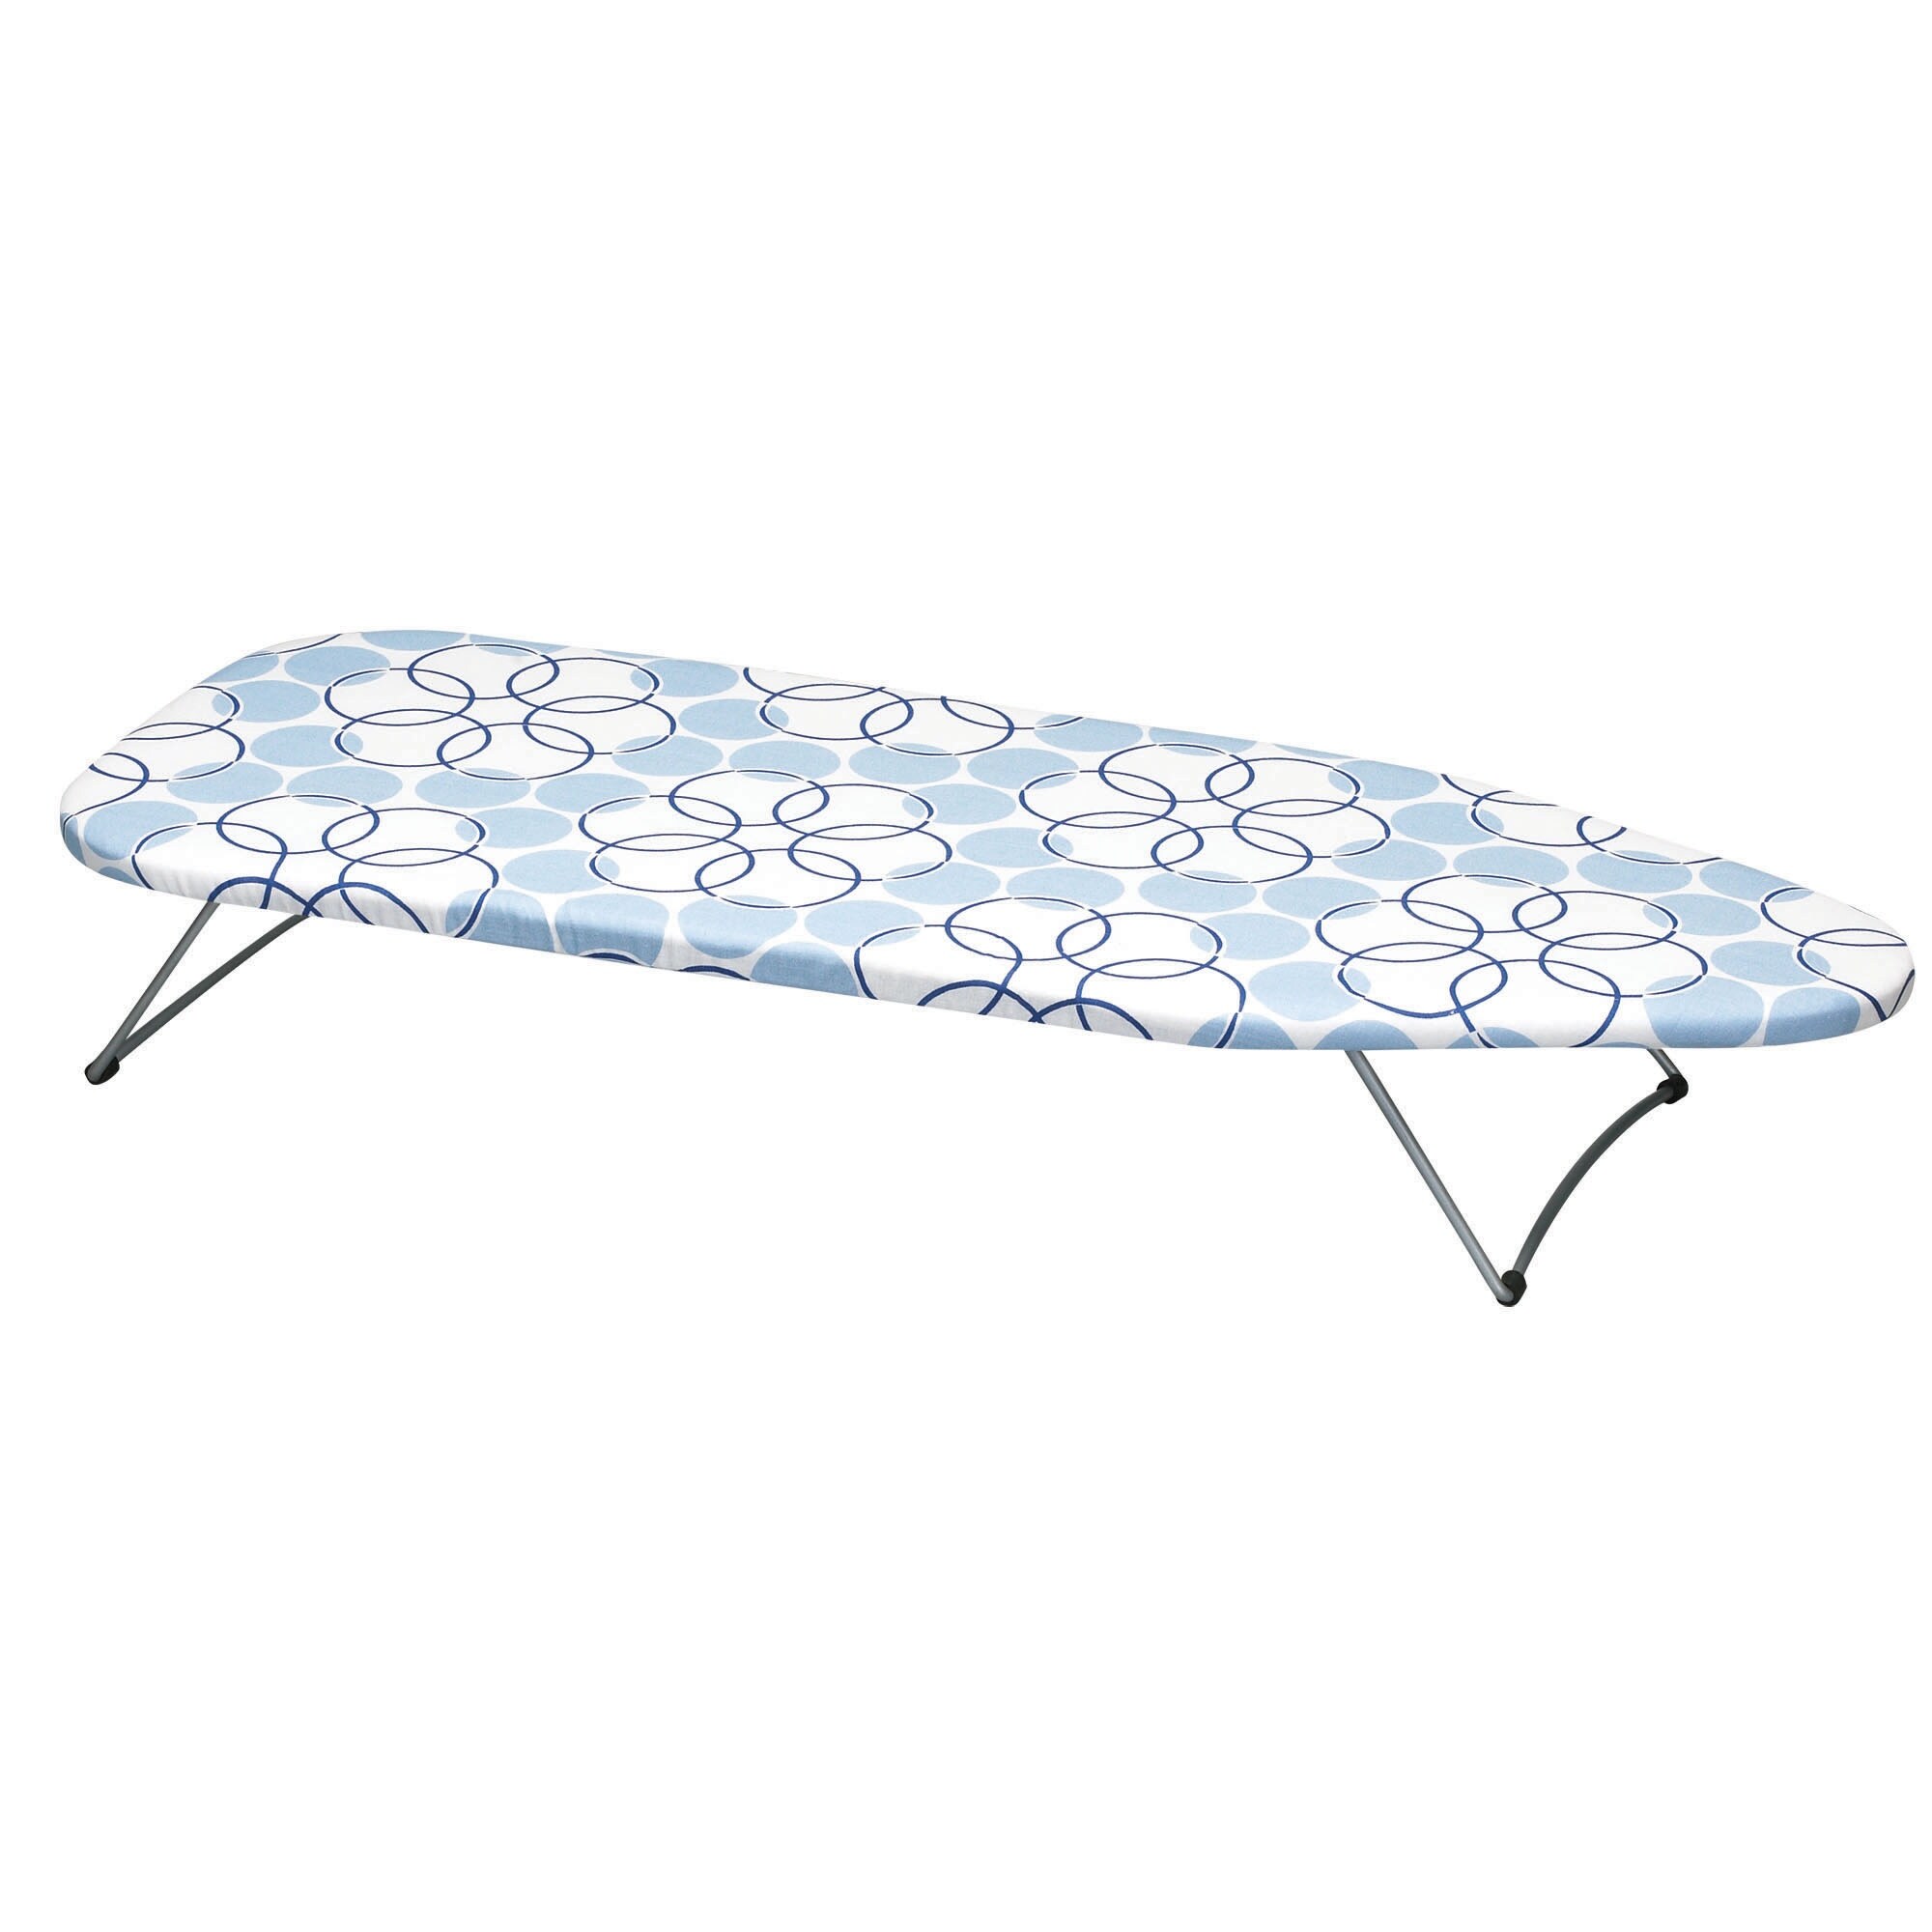  Ironing Mat for Hanging Door & Handheld Ironing Board, Portable  Ironing Pad Mat for Table Top Ironing Board, Foldable Heat Resistant Small  Ironing Board for Small Space : Home & Kitchen